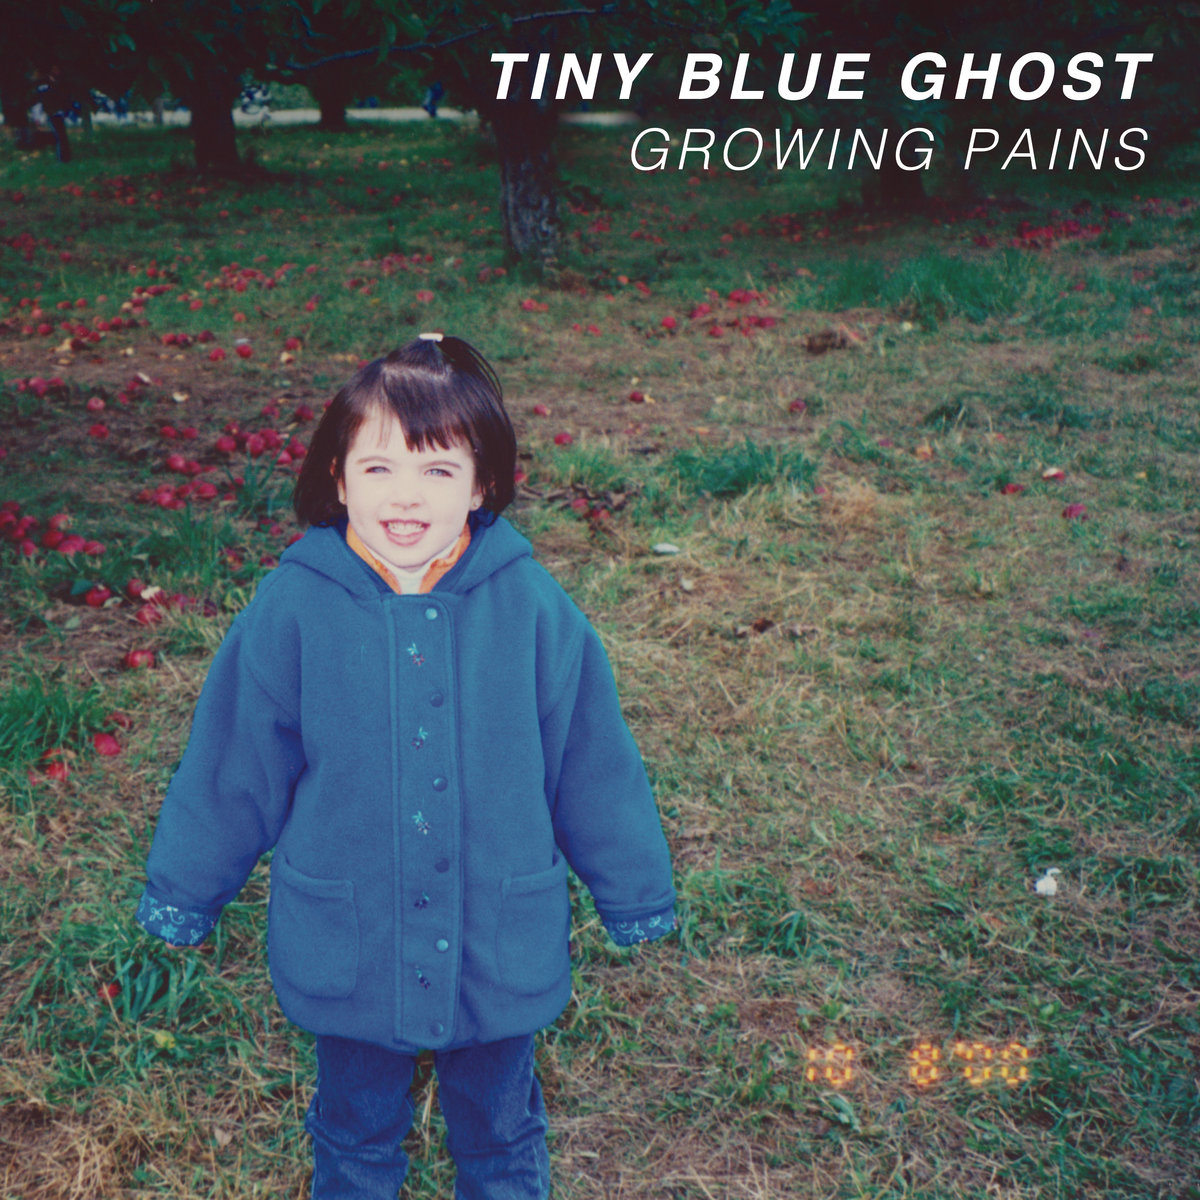 Growing Pains - Tiny Blue Ghost